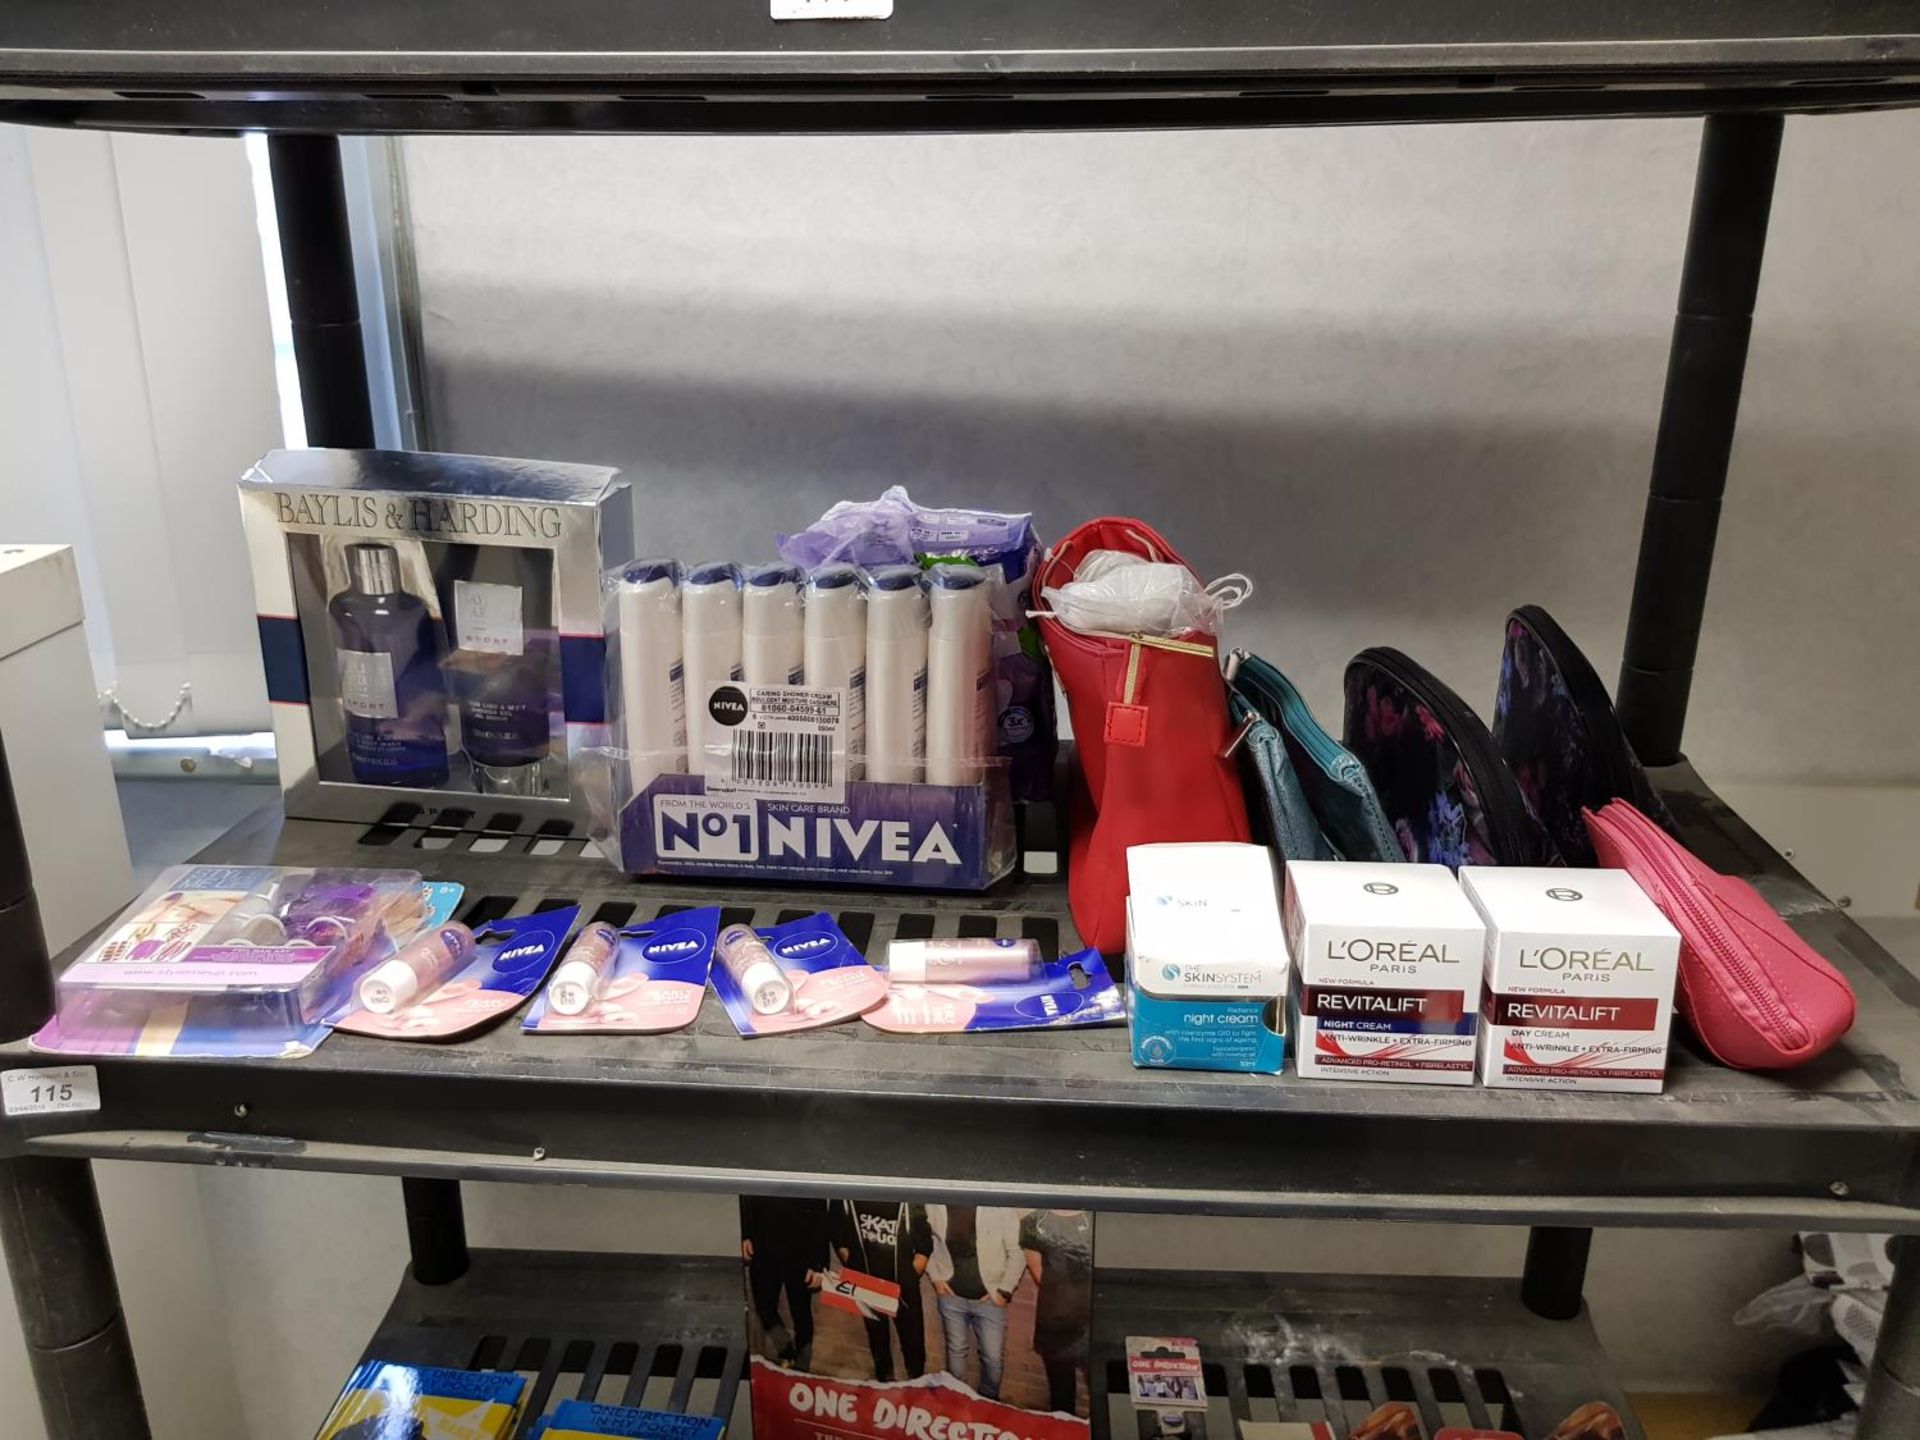 Contents of shelf – mixed beauty goods to include Baylis & Harding,